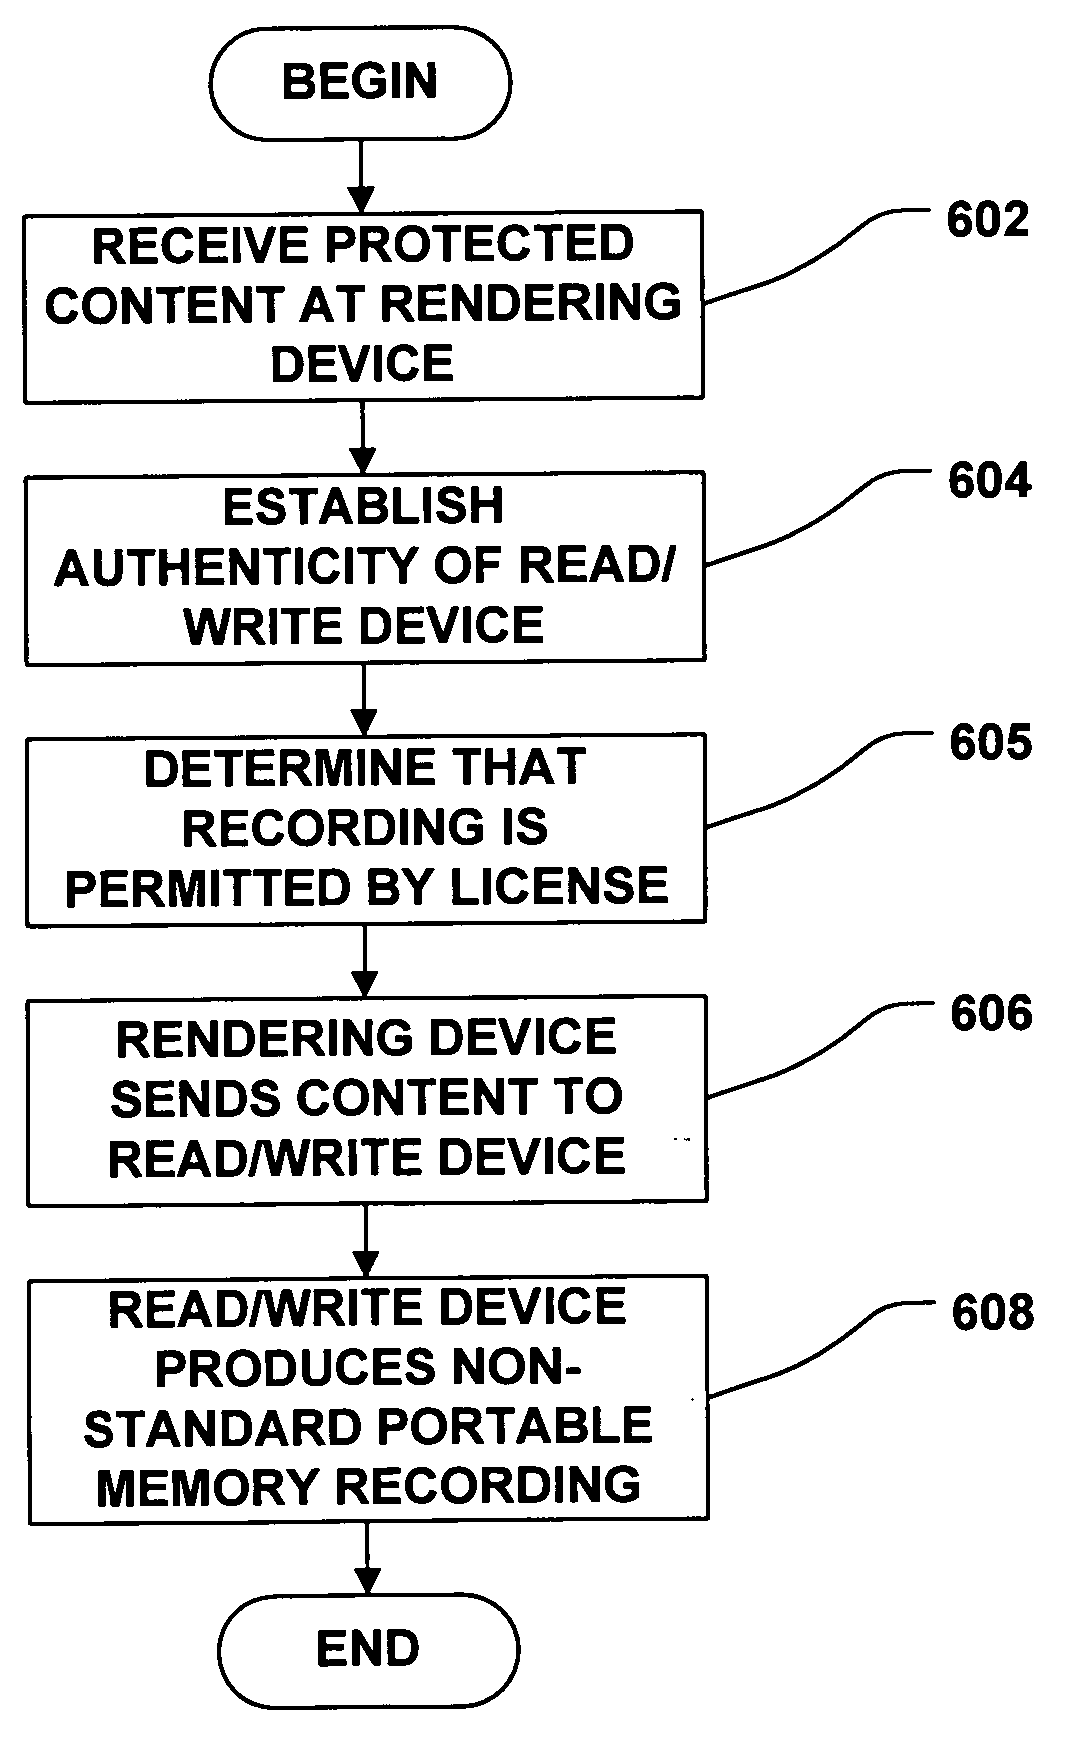 Protection of content stored on portable memory from unauthorized usage